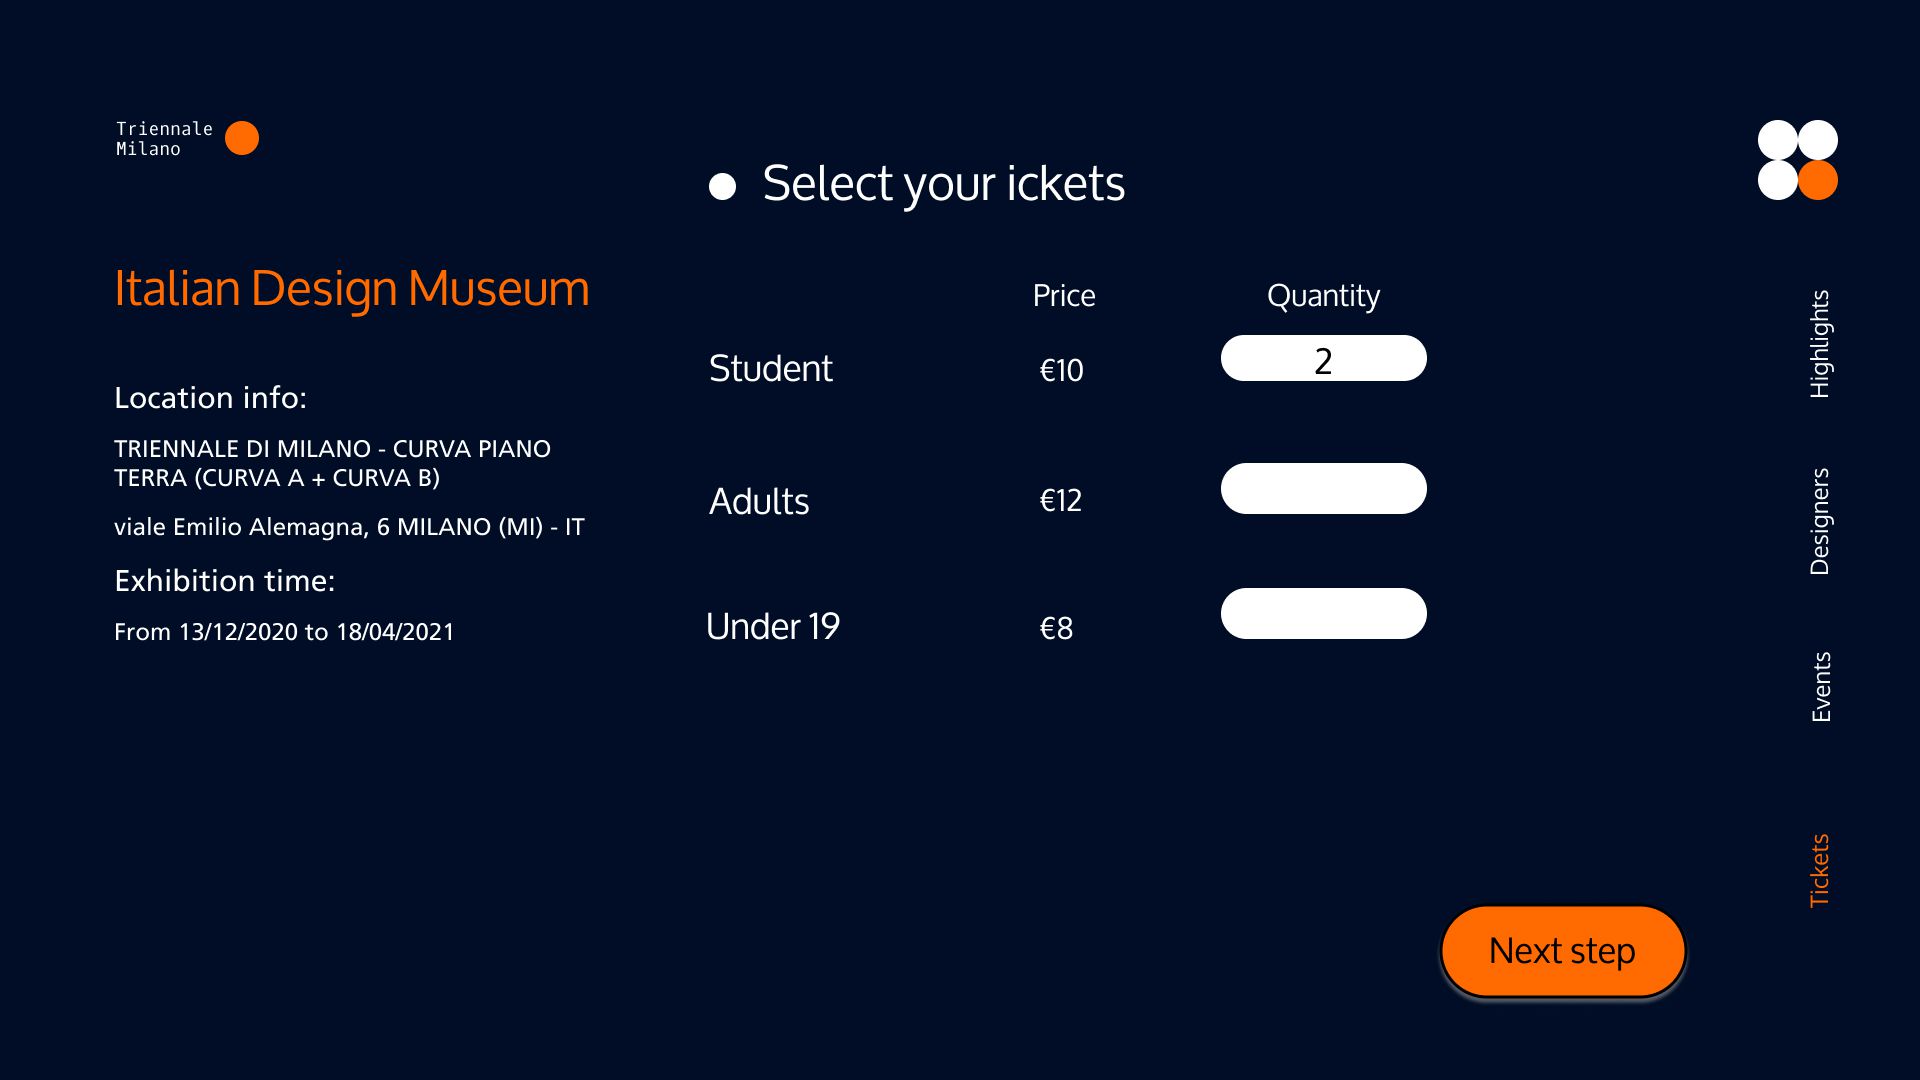 the ticket selection page